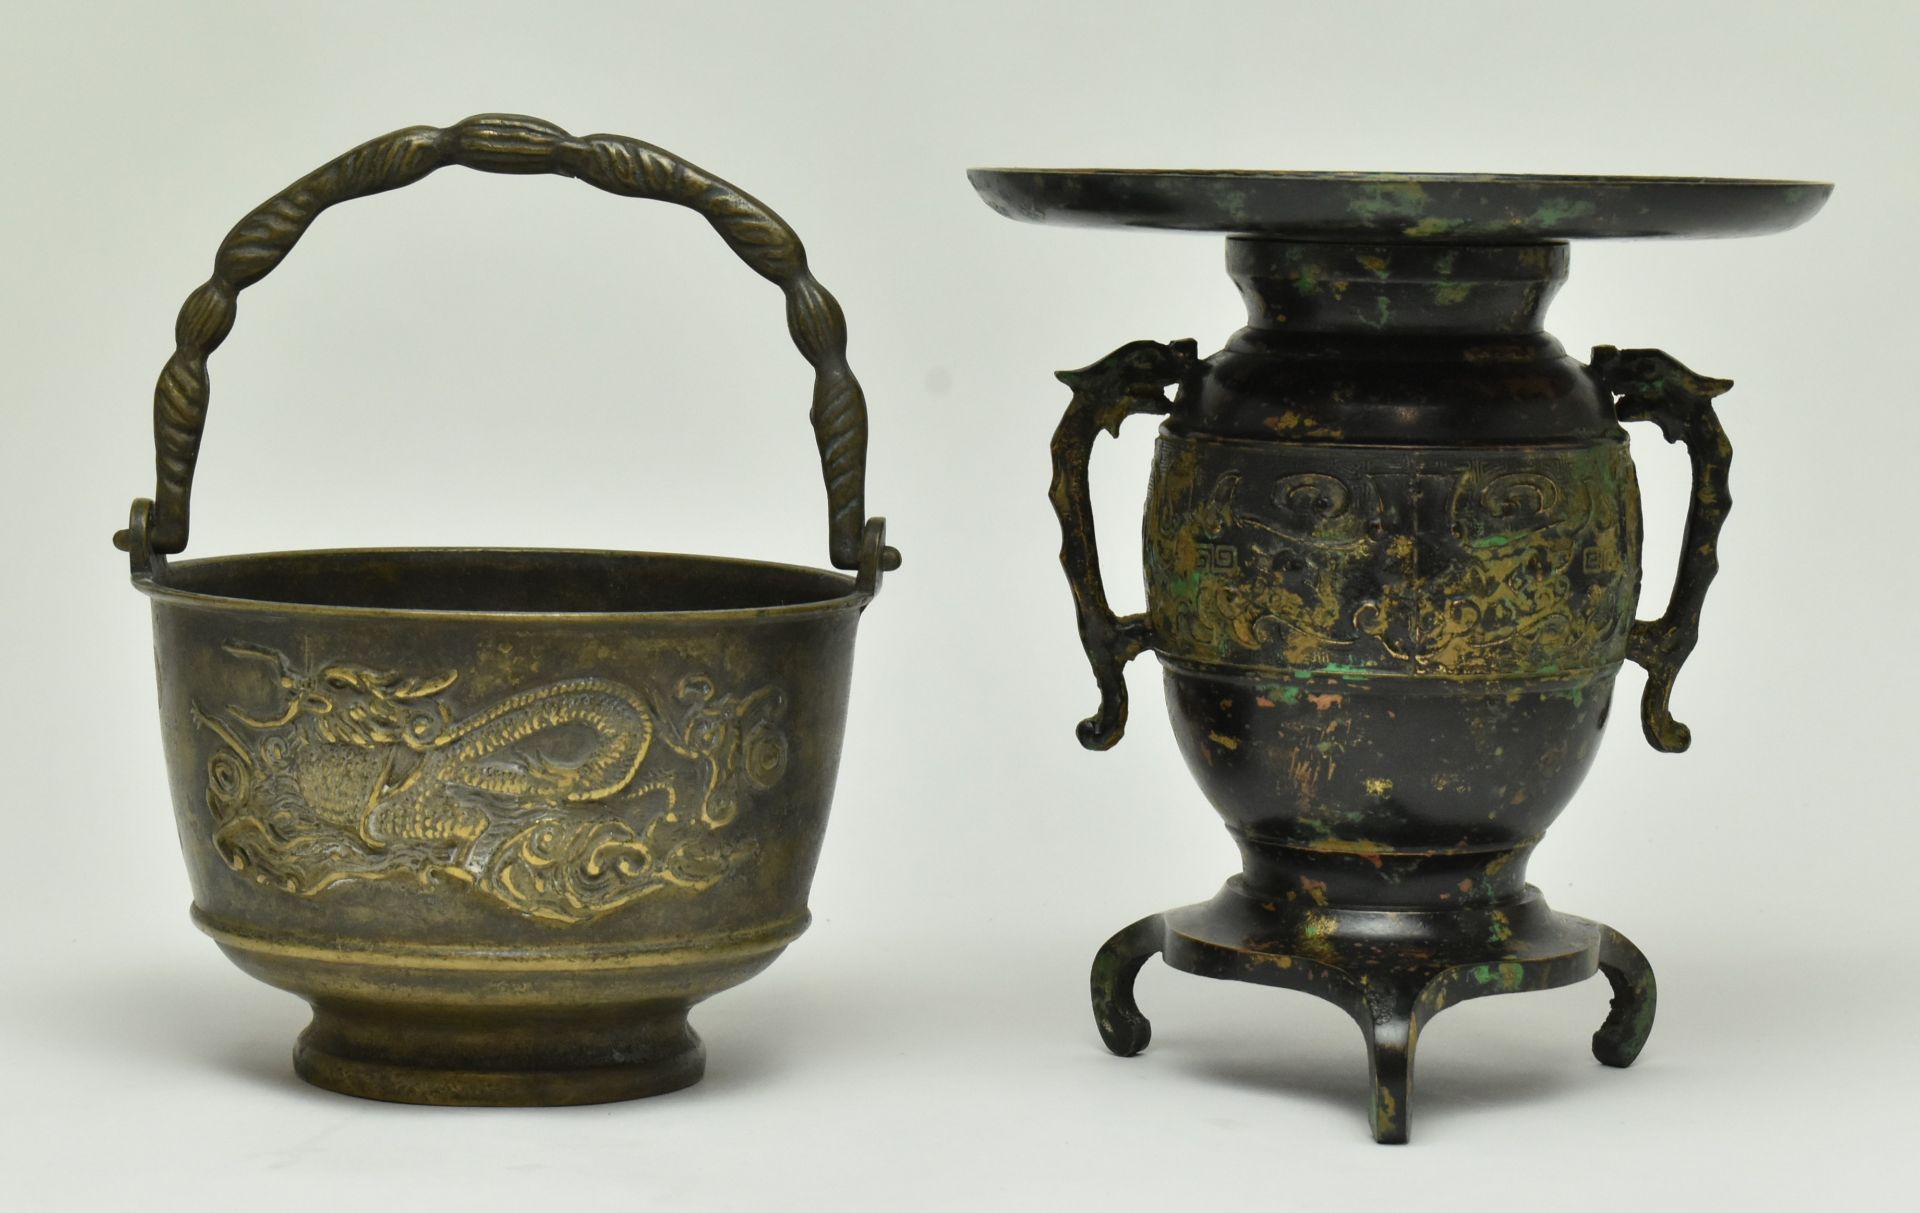 TWO JAPANESE BRONZE PIECES "DRAGON" CENSER AND PLANT POT